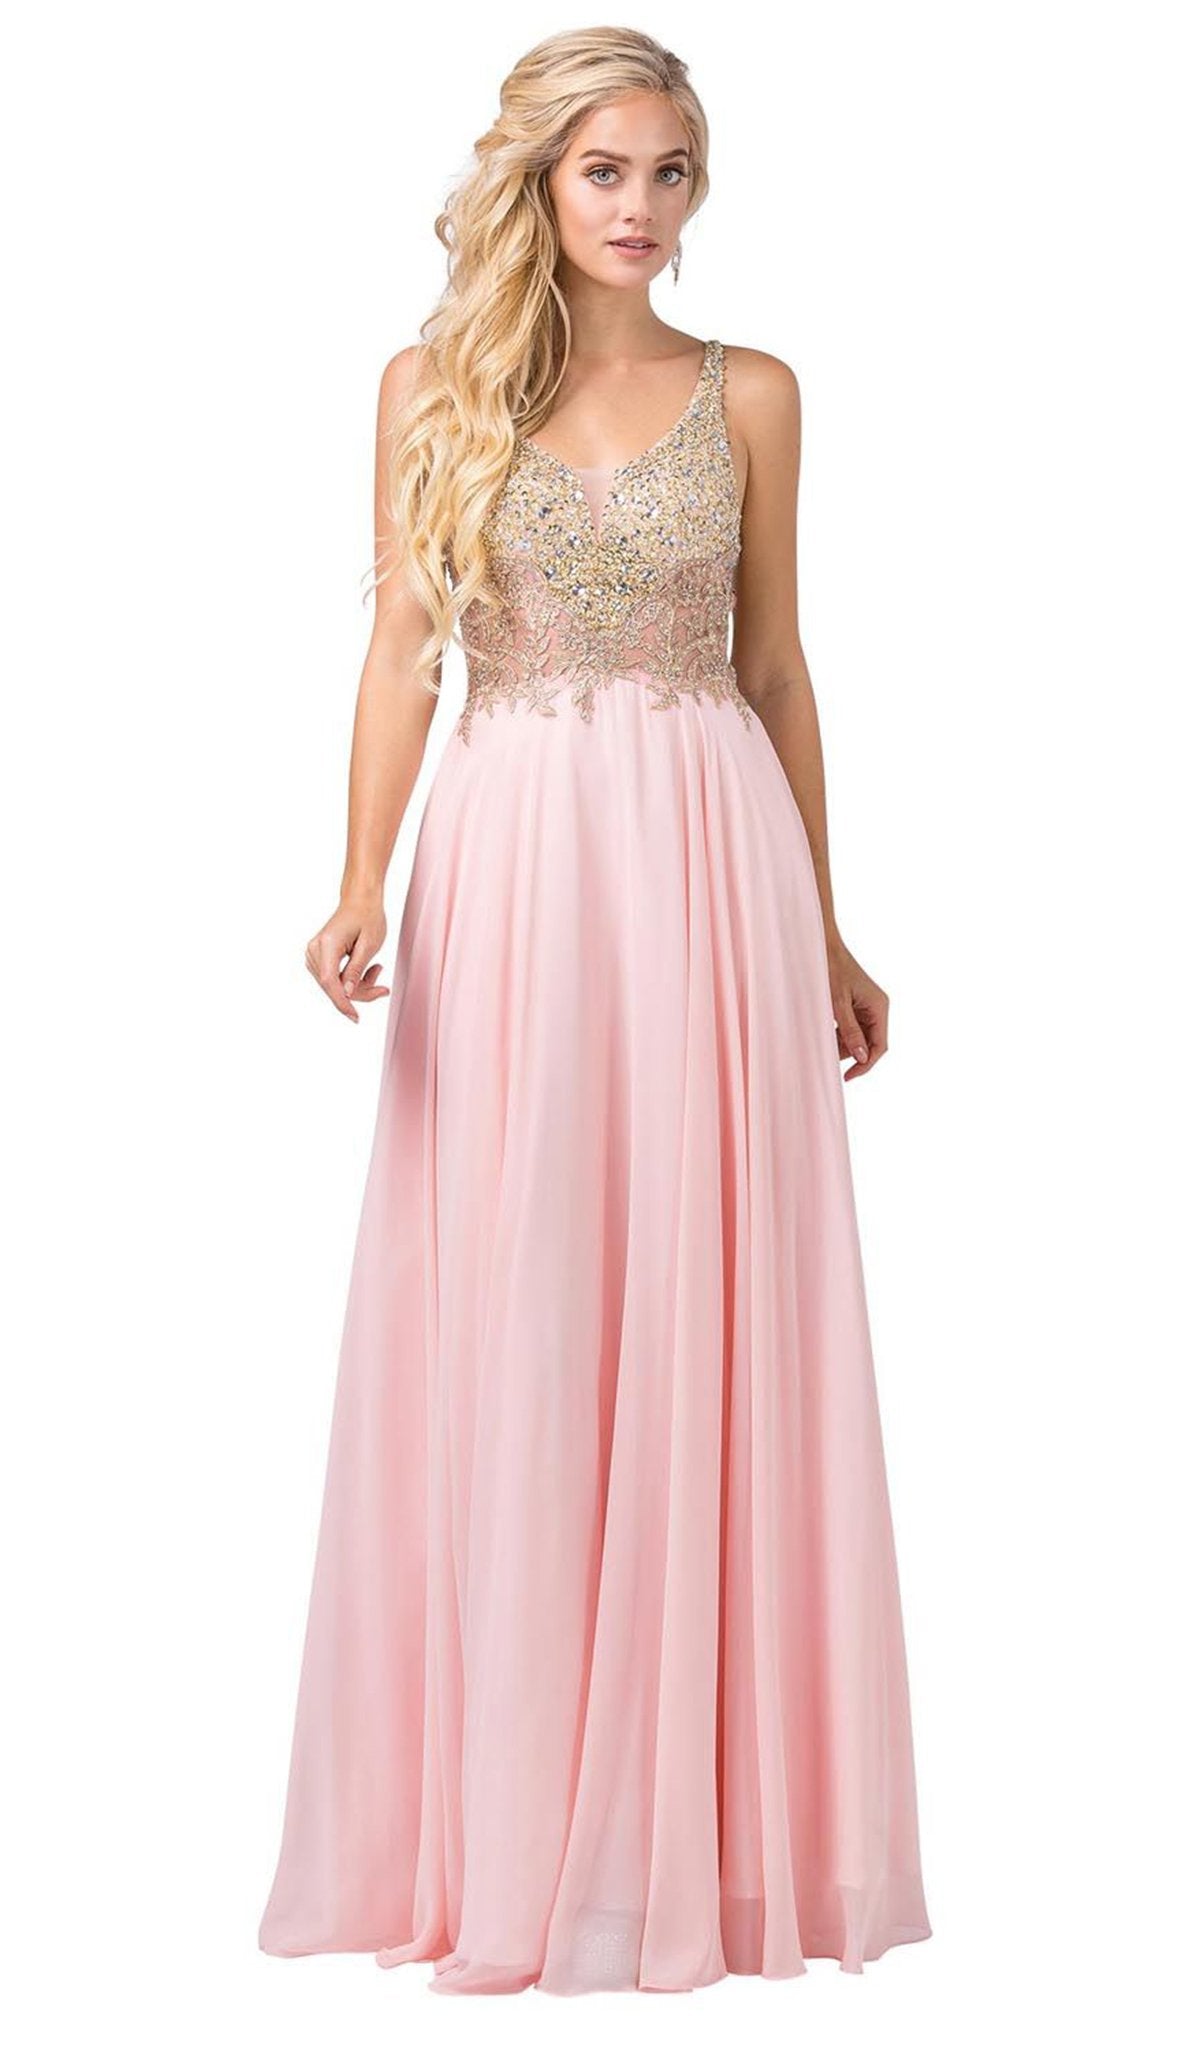 Dancing Queen - 2494 Jewel Encrusted Bodice A-Line Chiffon Gown In Pink